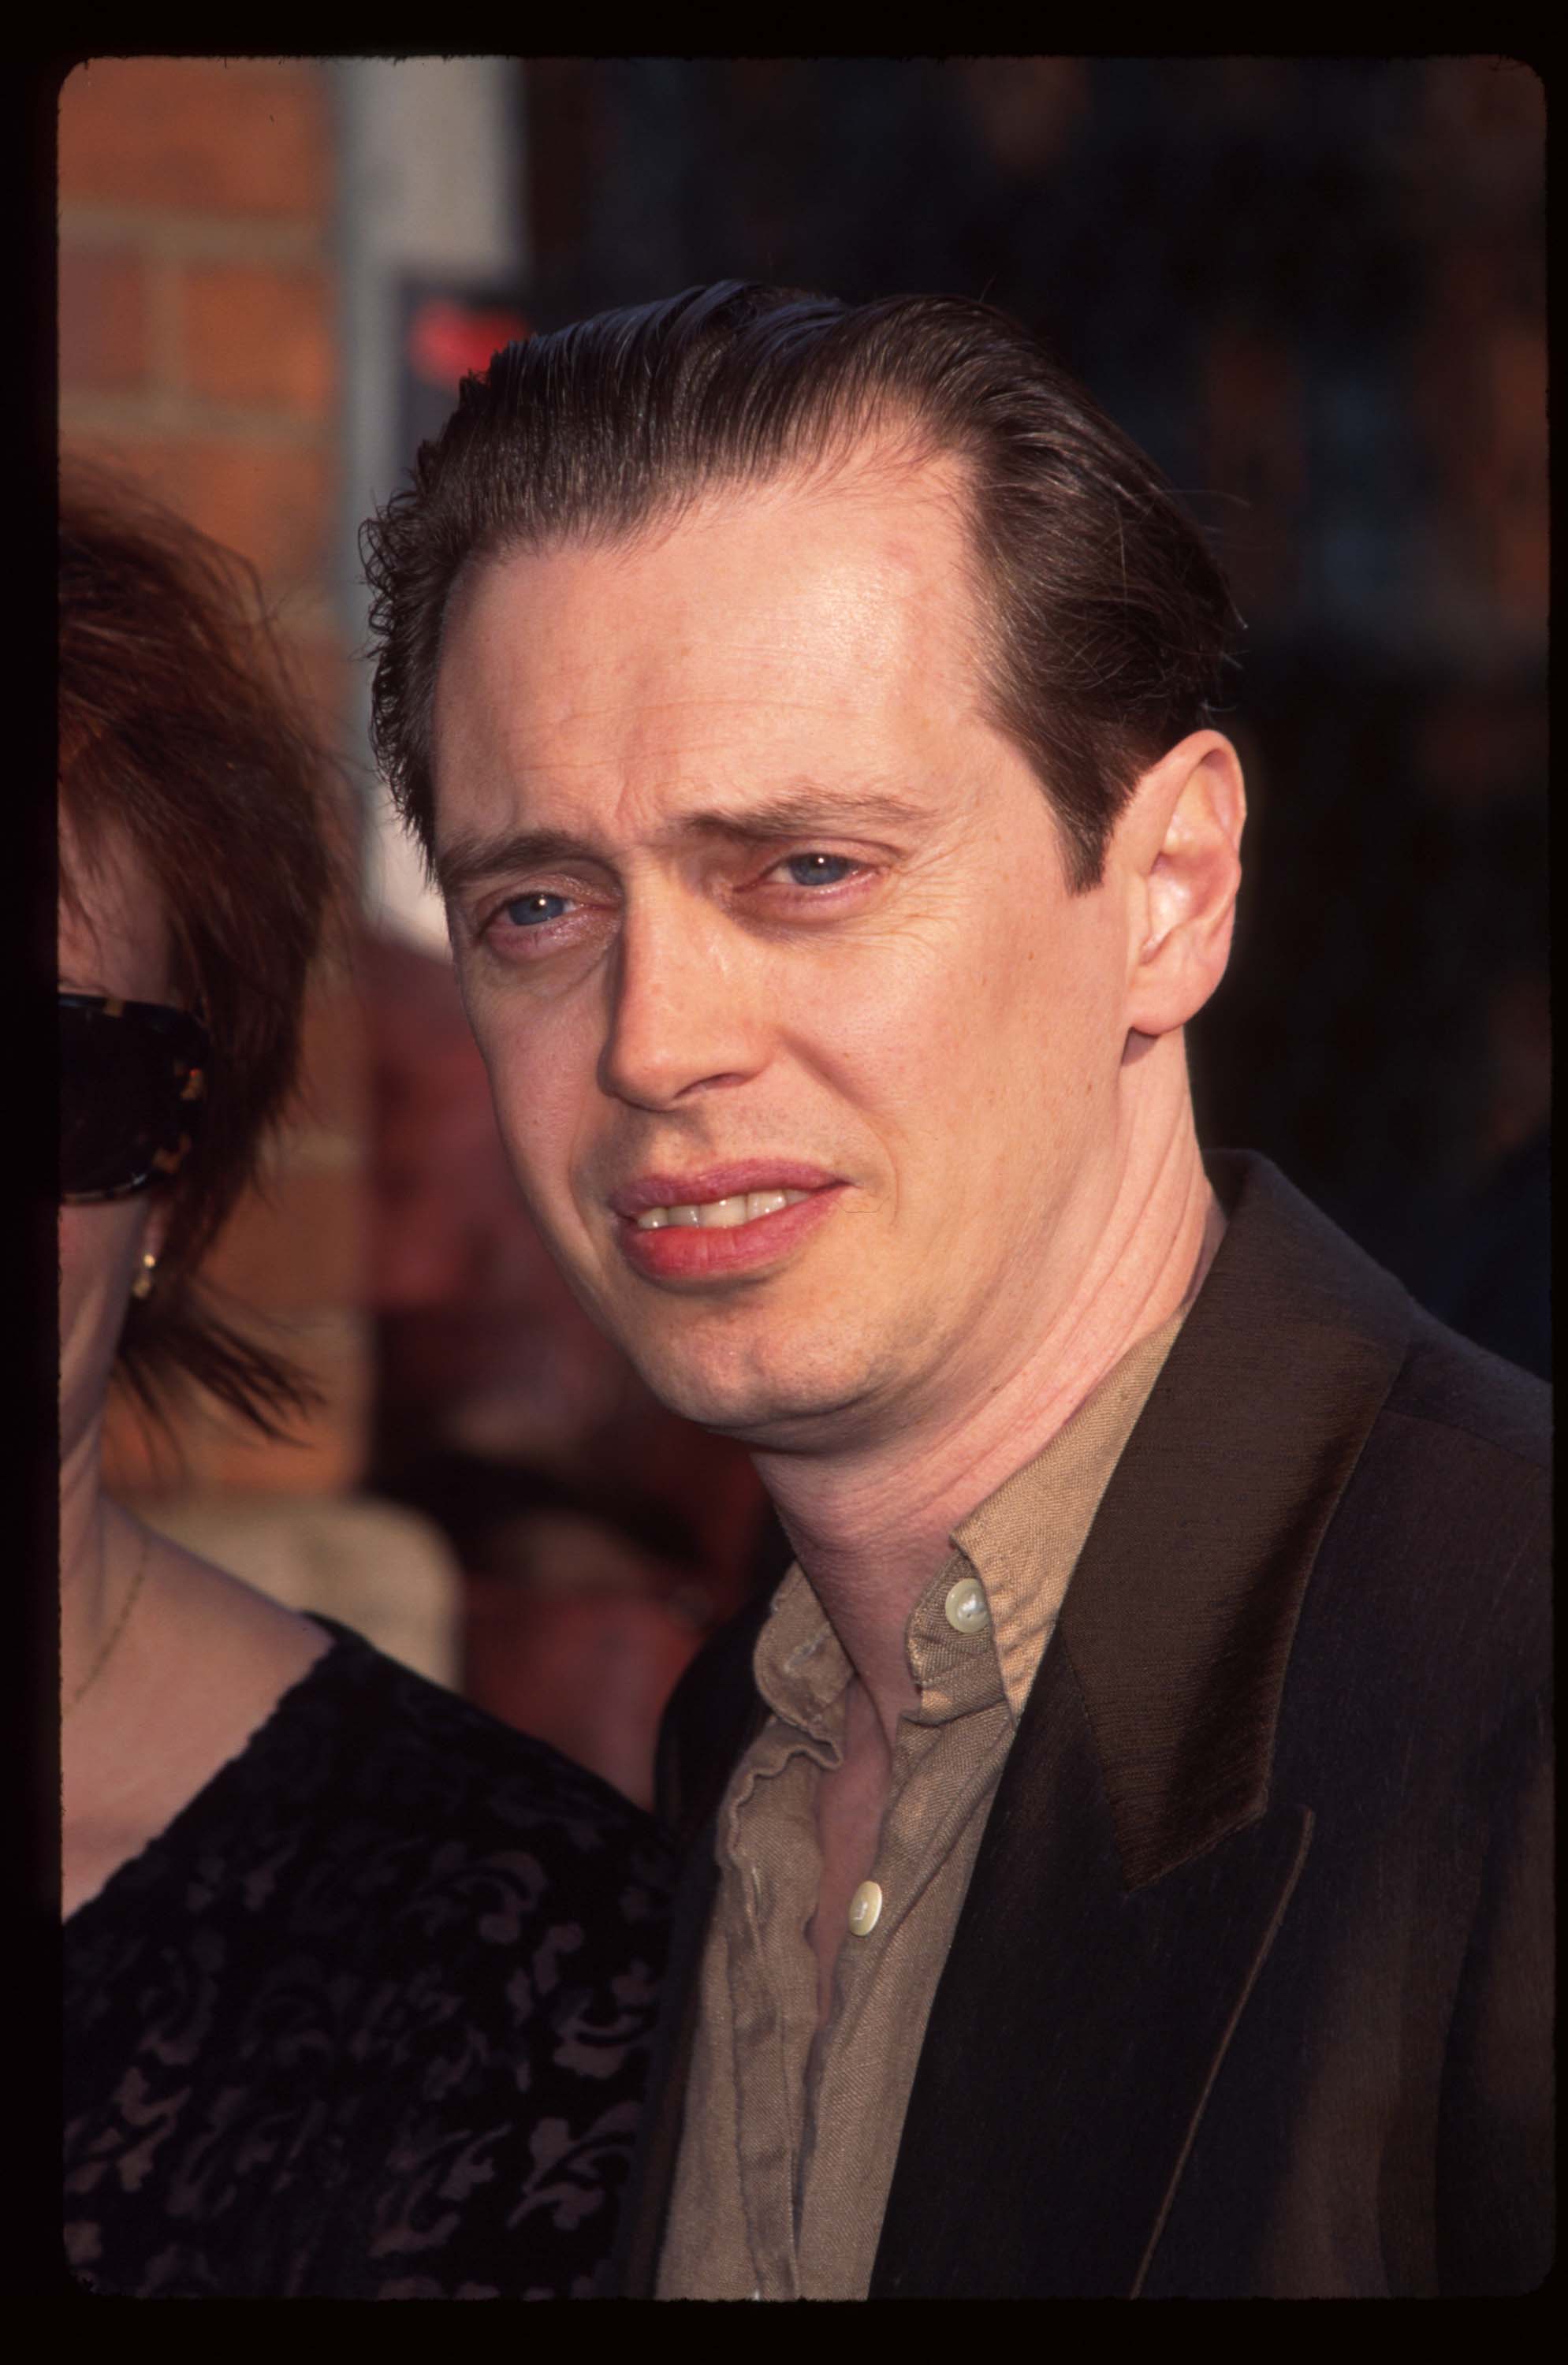 Steve Buscemi attends the special screening of the film "Dead Man" at the Tribeca Film Center May 5, 1996 in New York City. | Photo: GettyImages